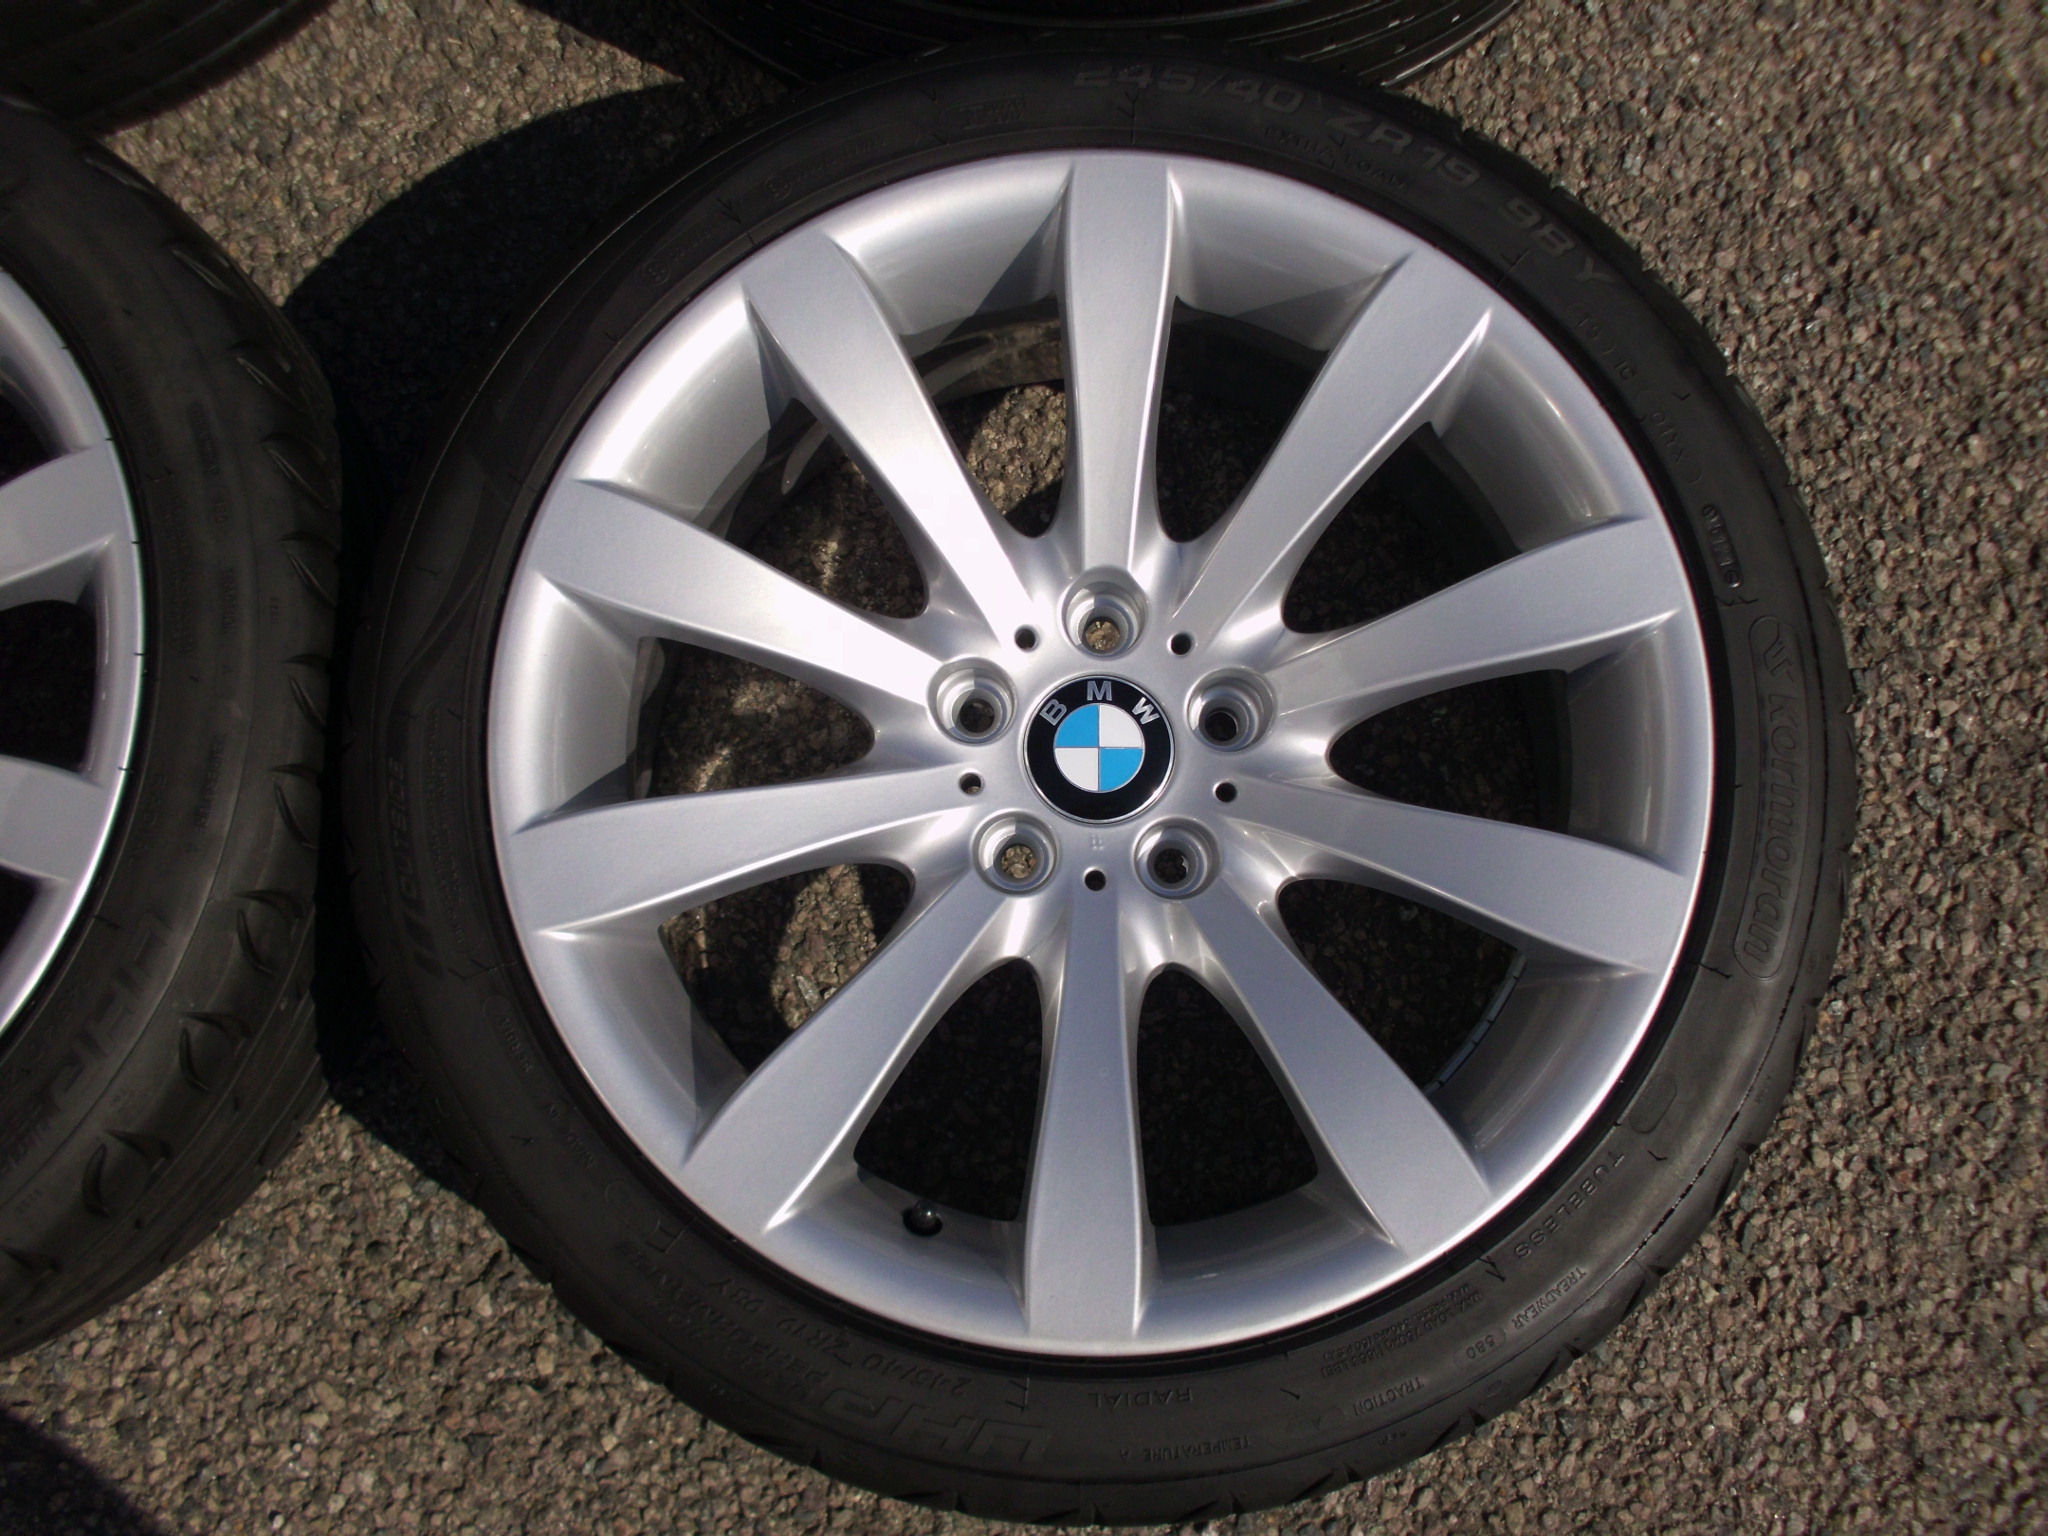 USED 19" GENUINE BMW STYLE 218 MULTI SPOKE ALLOY WHEELS FROM LATER SPORT MODELS,WIDE REAR, FULLY REFURBED INC GOOD TYRES